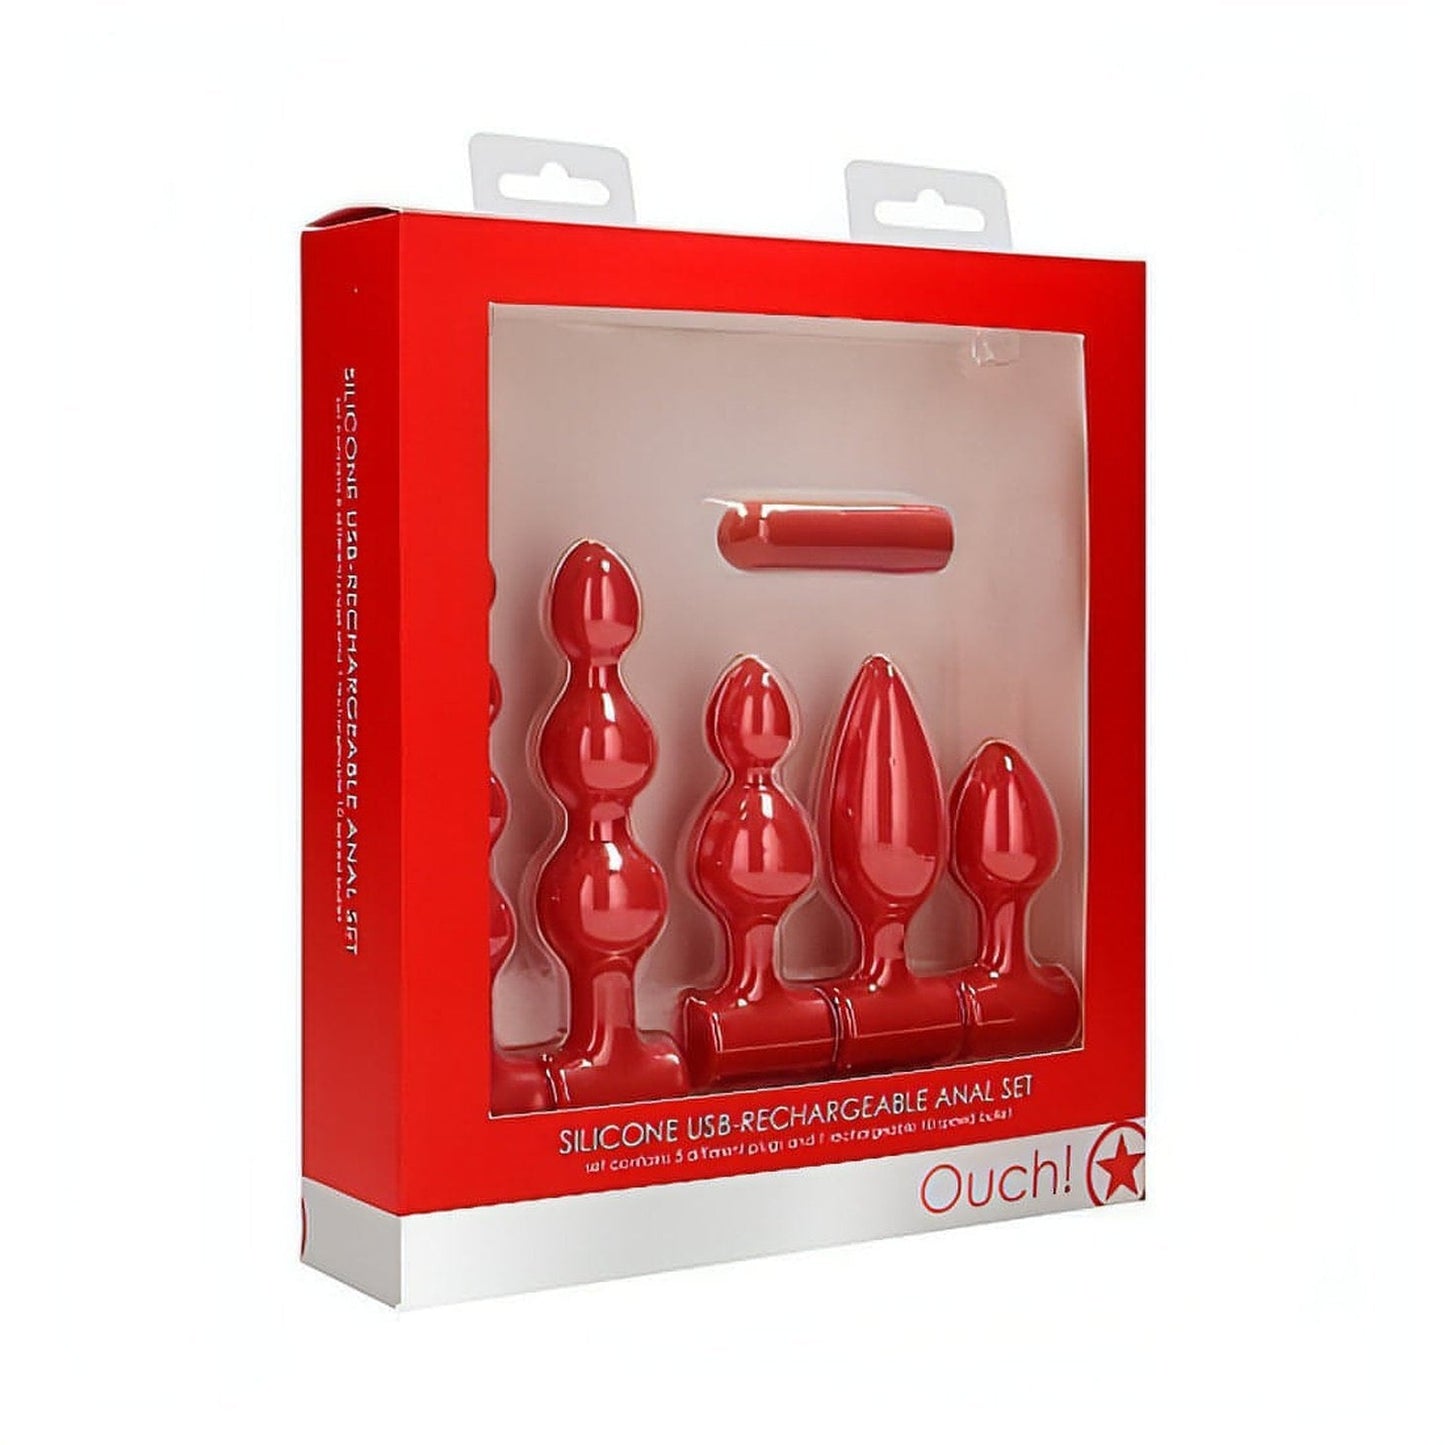 Super Anal Kit: 3 Anal Beads e 2 Anal Plugs con Vibratore Intercambiabile - 100% Silicone Medicale, Anallergico, Ricaricabile, R Ouch